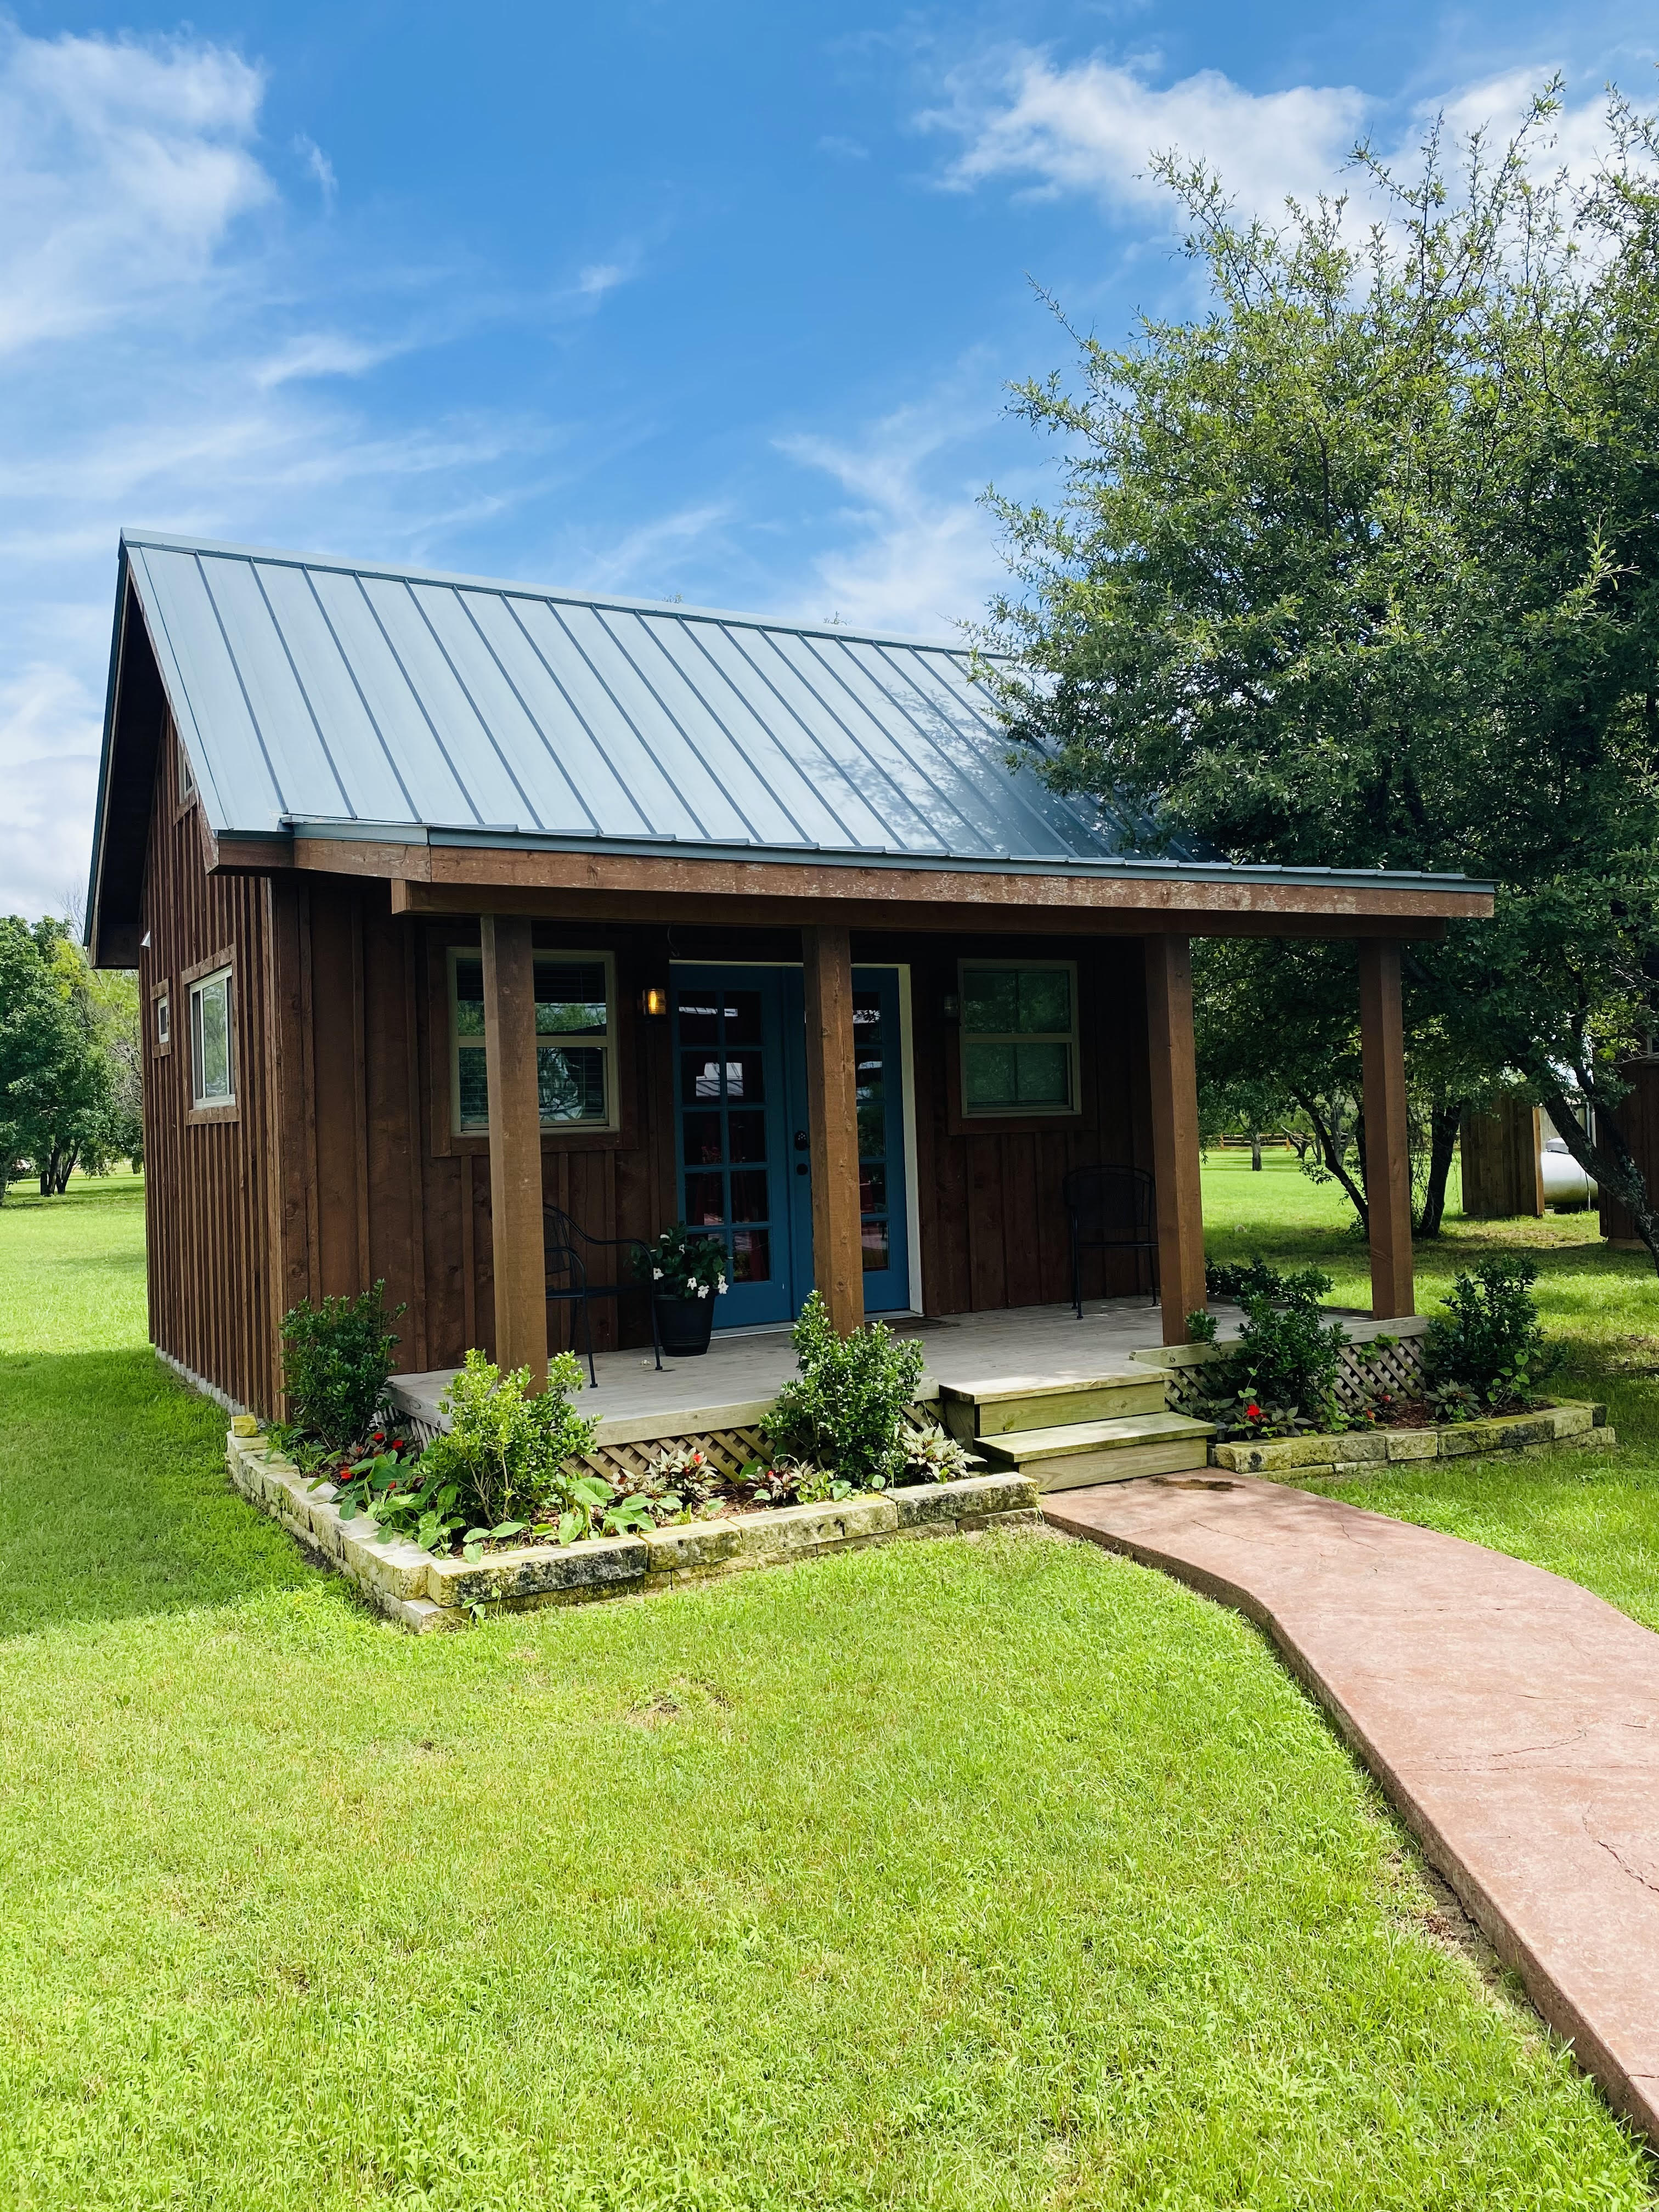 Looking where to stay in Waco, Tx? These tiny cabins in Waco, Texas. Only 10 minutes to Chip and Joanna Gaines Magnolia Market, Magnolia Home and Magnolia Table. A great place to stay in Waco and super affordable